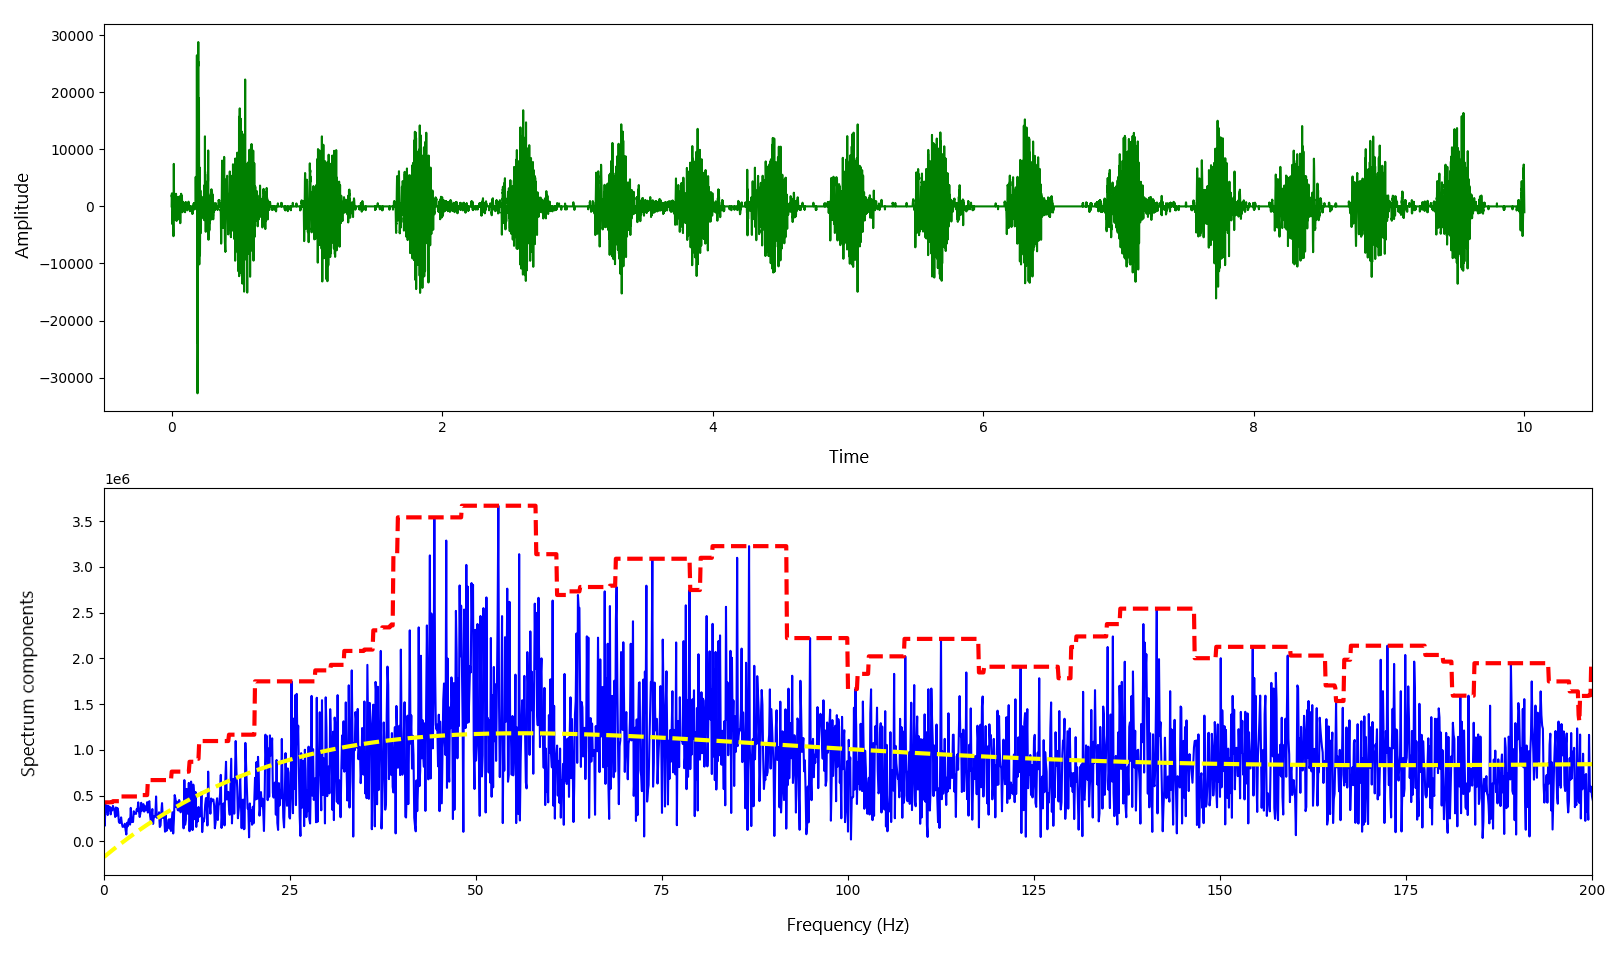 Oscillogram, spectrogram and PKG processing results with diamond noise